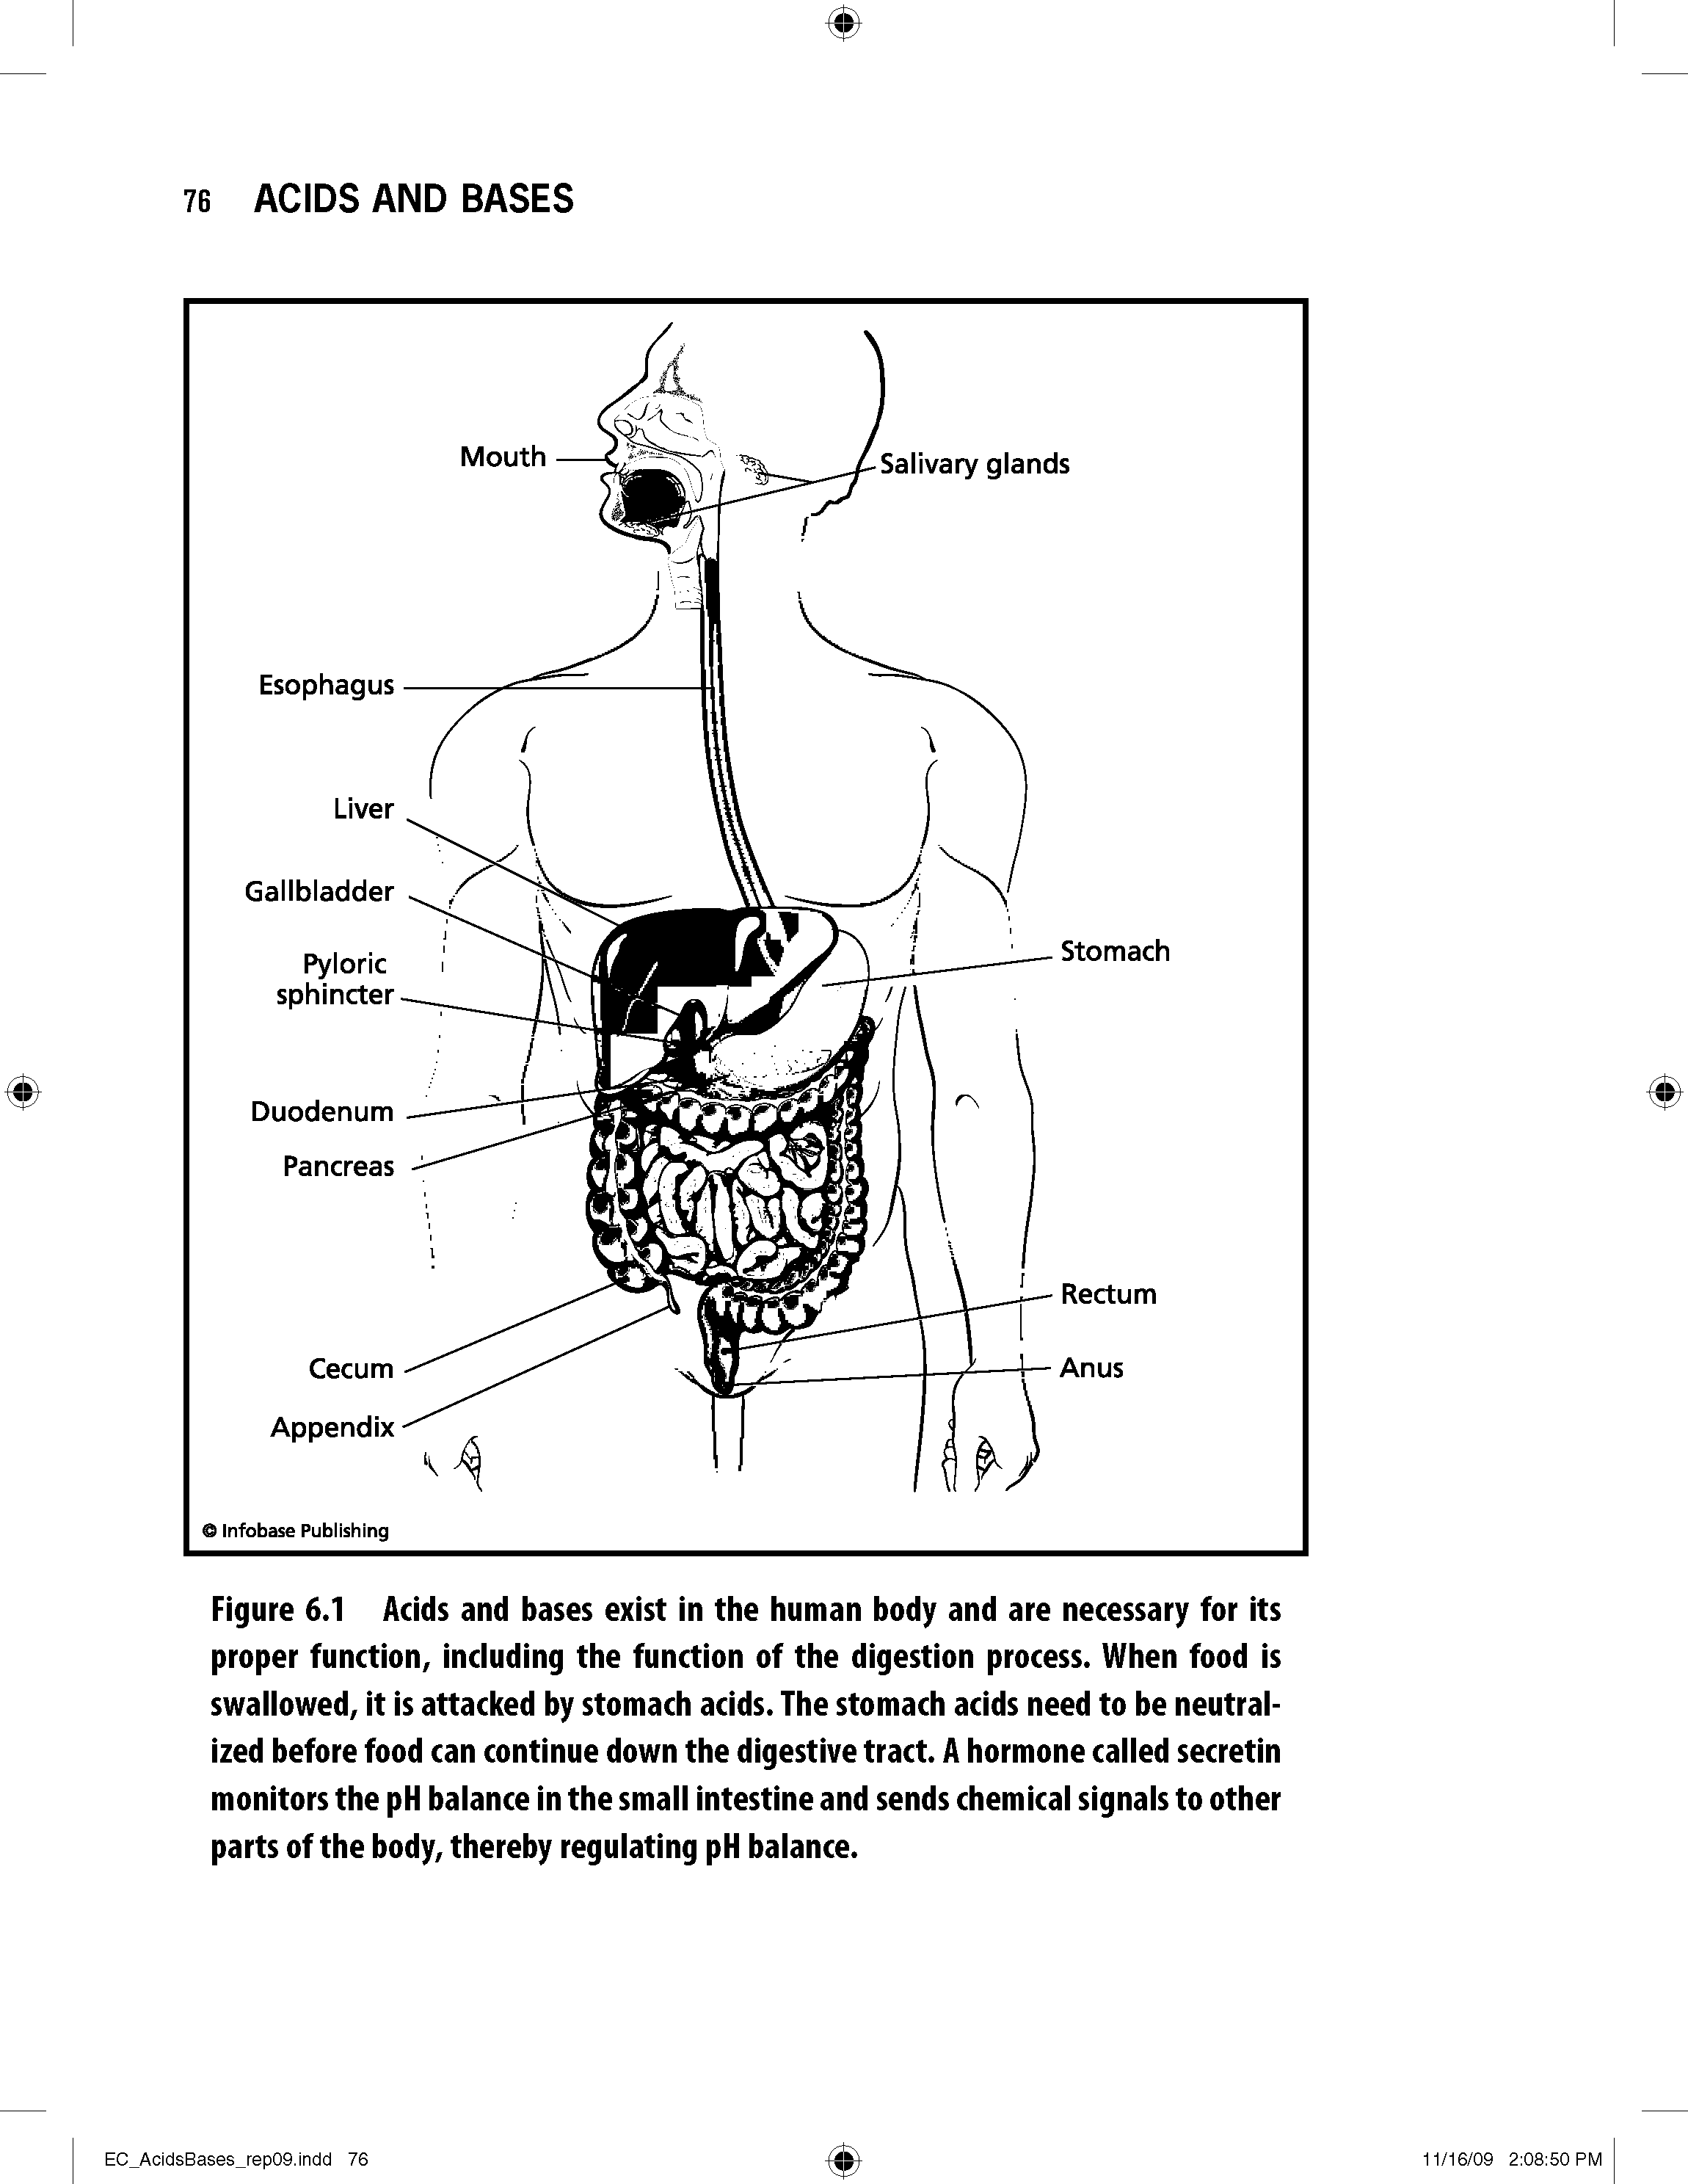 Figure 6.1 Acids and bases exist in the human body and are necessary for its proper function, including the function of the digestion process. When food is swallowed, it is attacked by stomach acids. The stomach acids need to be neutralized before food can continue down the digestive tract. A hormone called secretin monitors the pH balance in the small intestine and sends chemical signals to other parts of the body, thereby regulating pH balance.